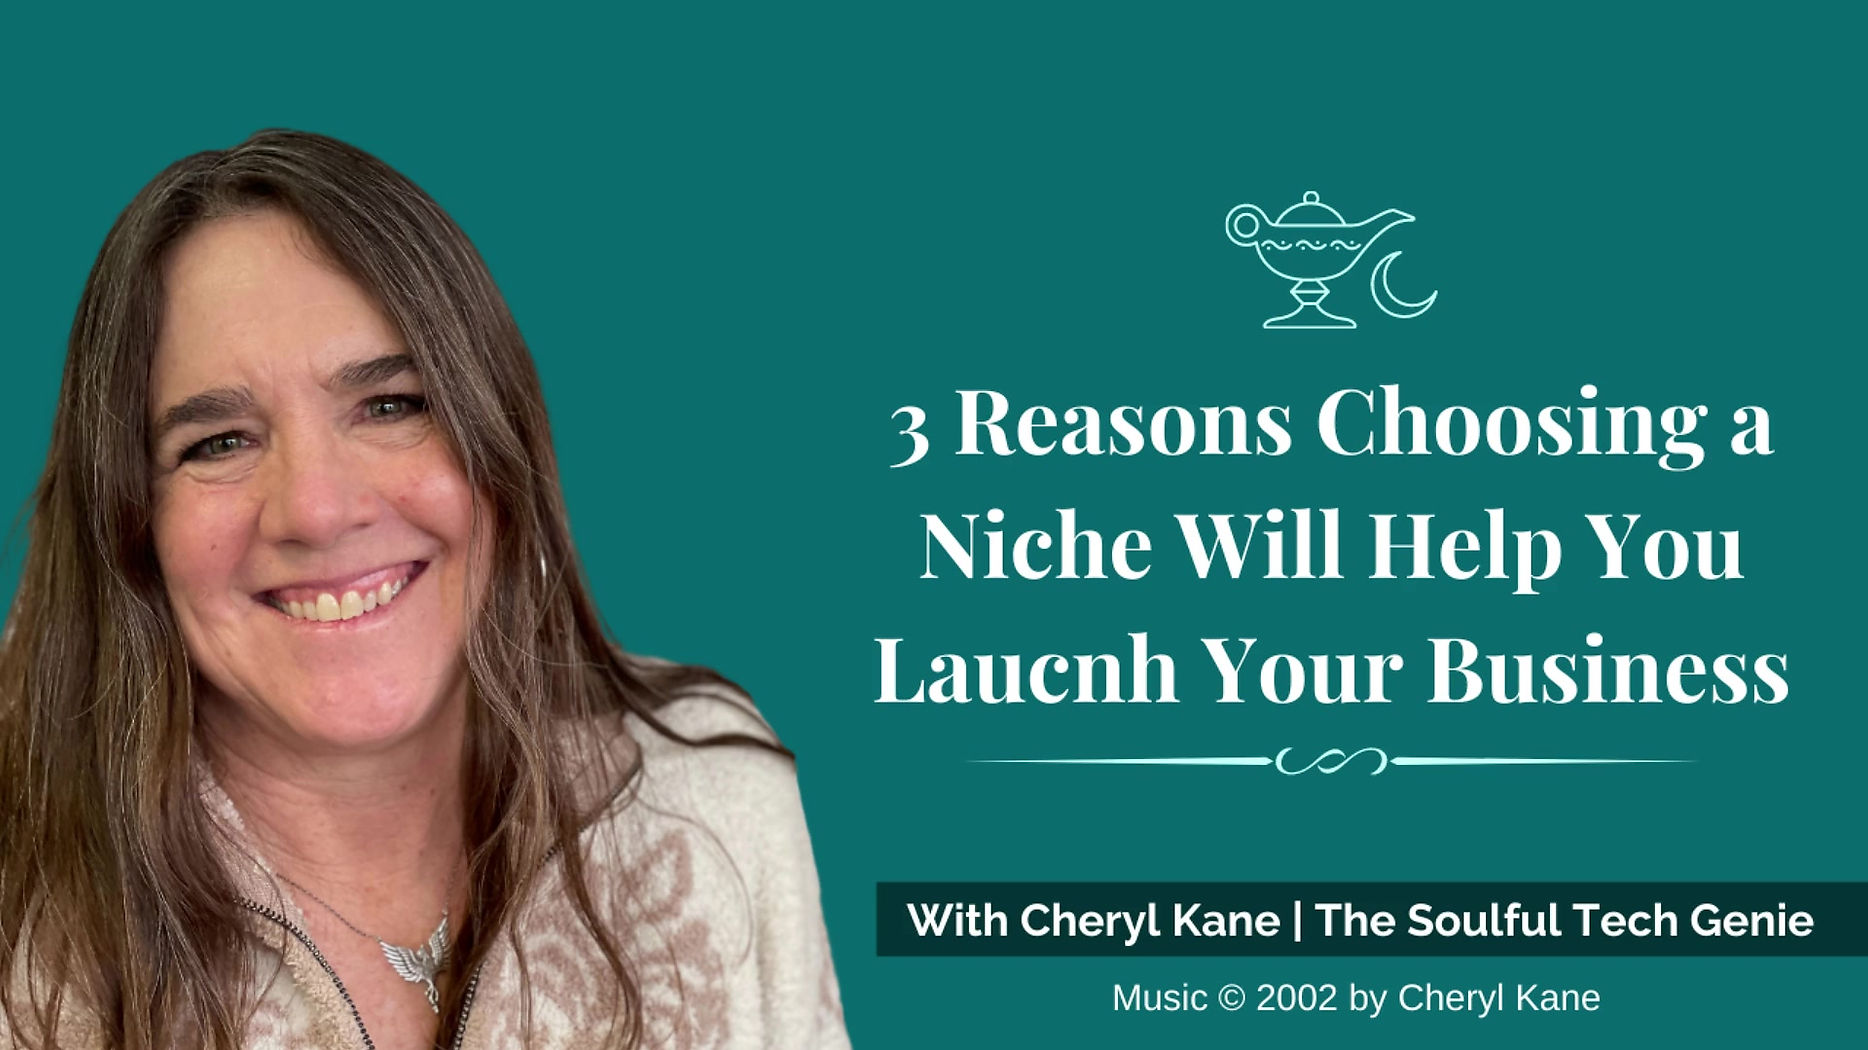 3 Reasons Choosing a Niche Will Help You Launch Your Business